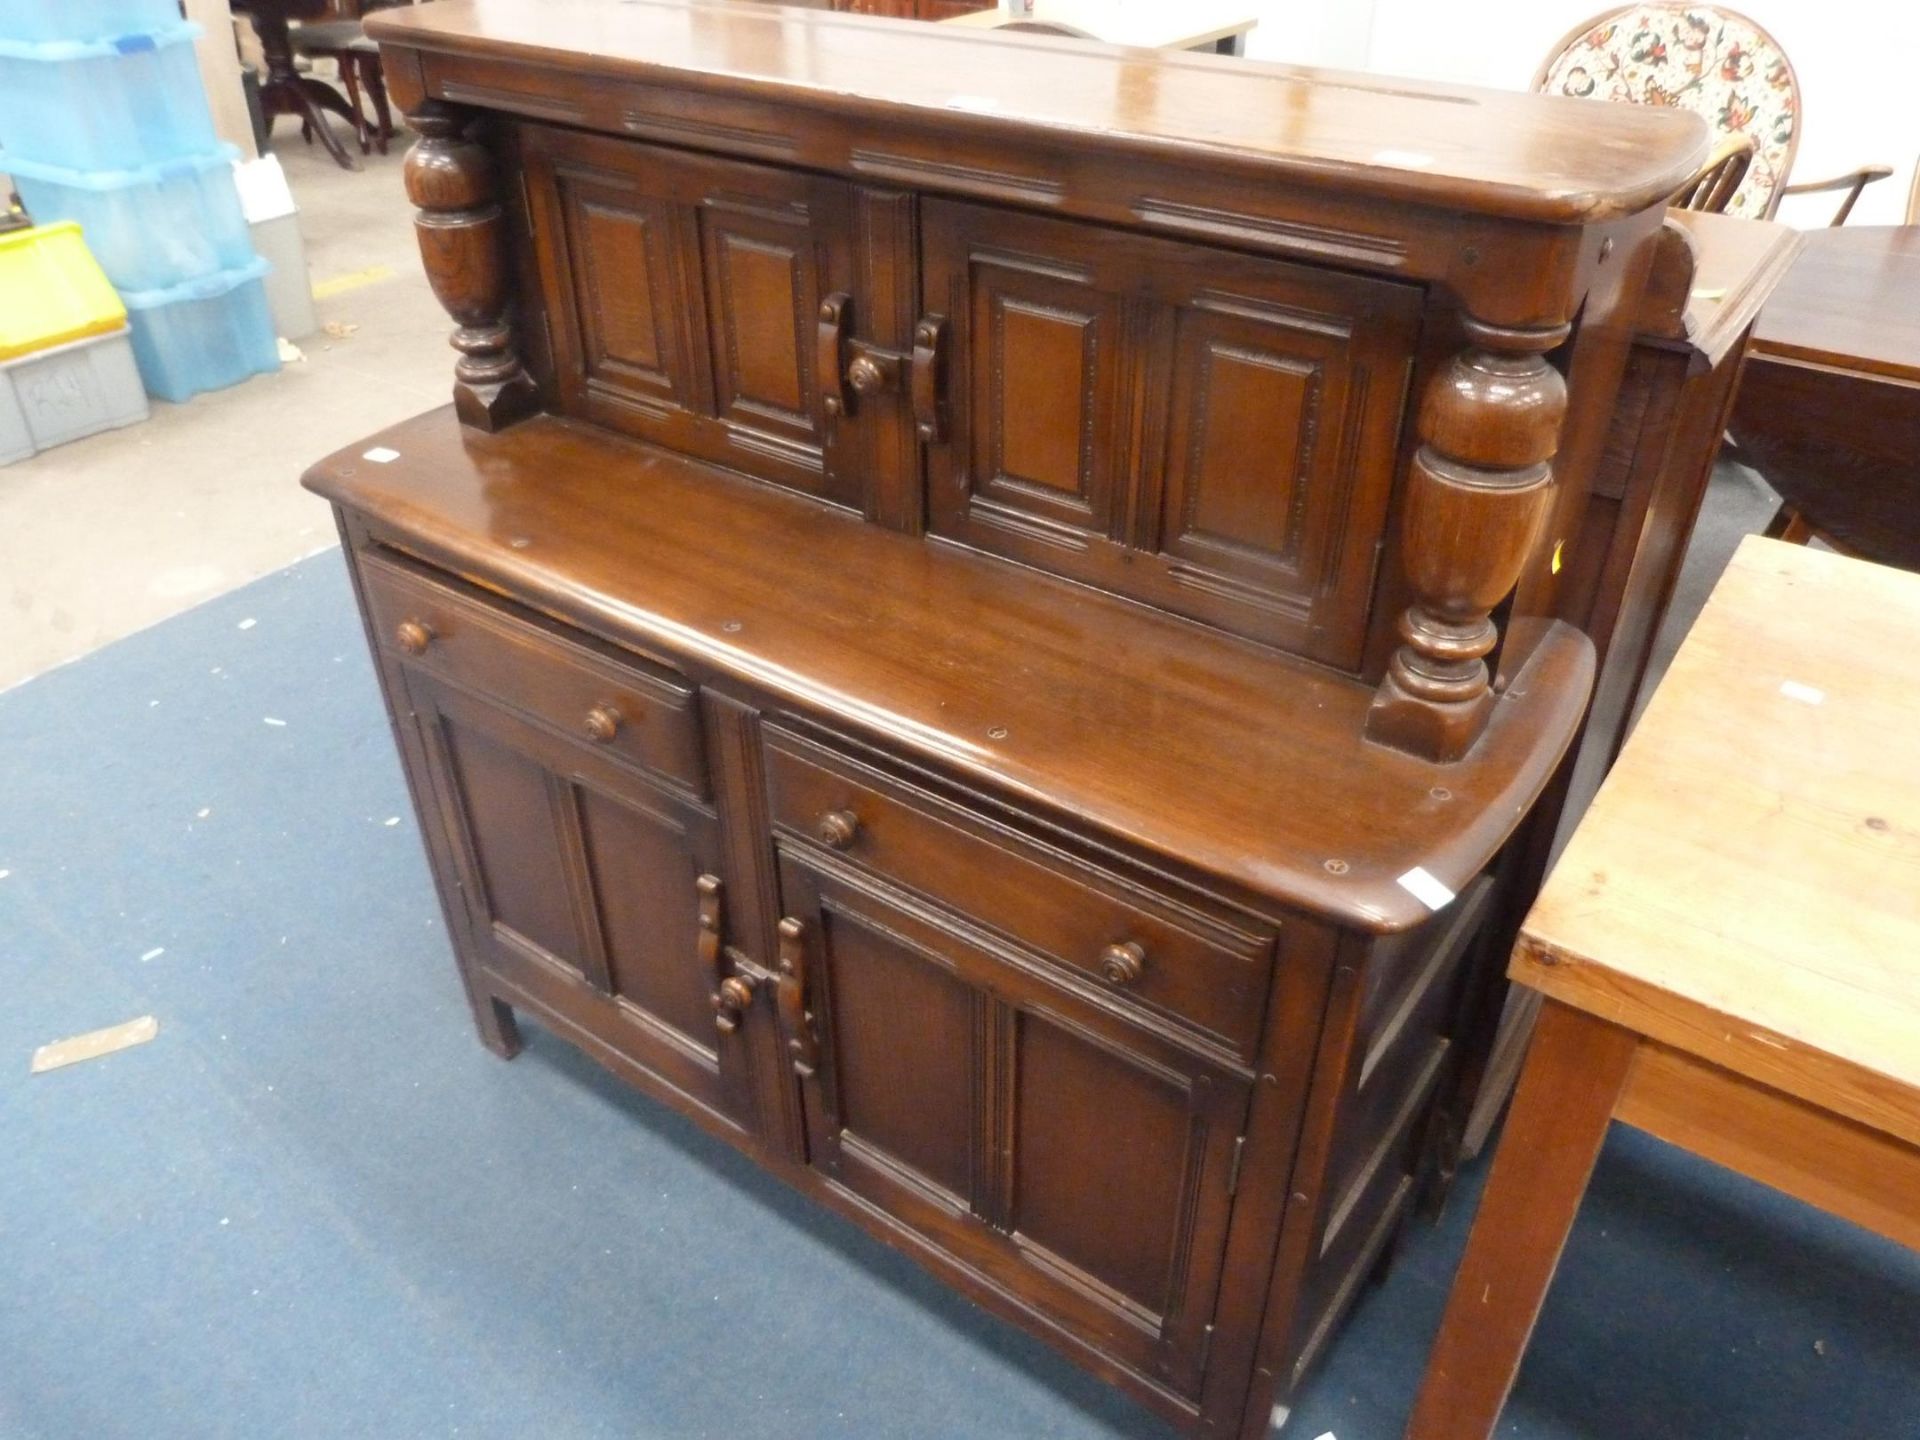 An Ercol Court Cabinet (with cutlery drawer and contents) (H 126cm, W 123cm, D 45cm) (est. £50-£80)